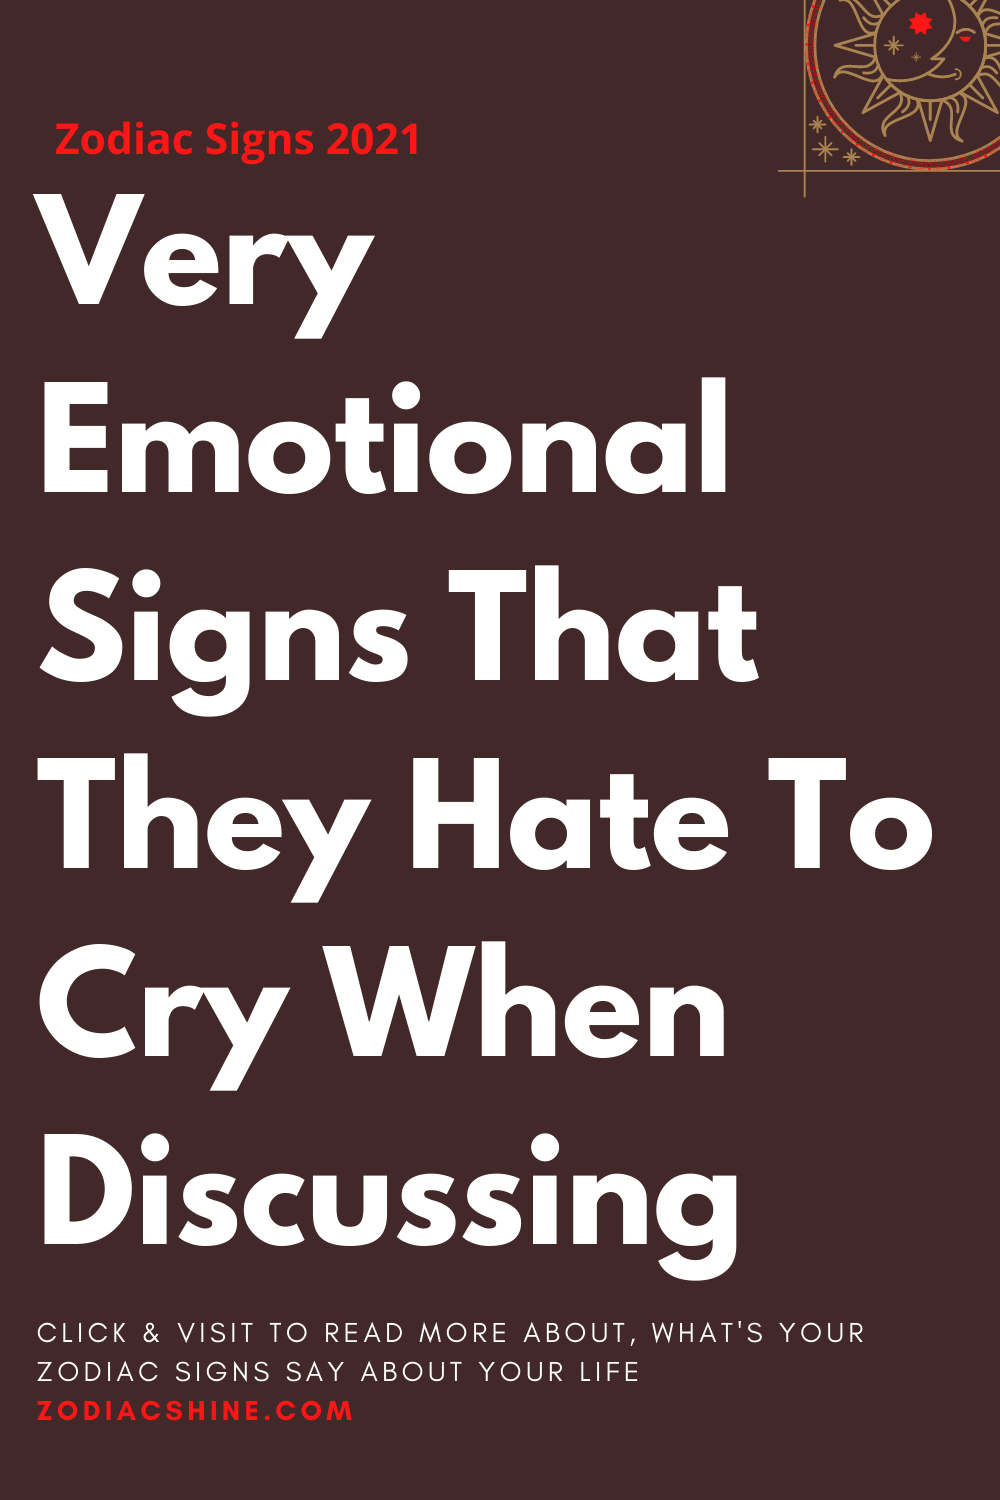 Very Emotional Signs That They Hate To Cry When Discussing